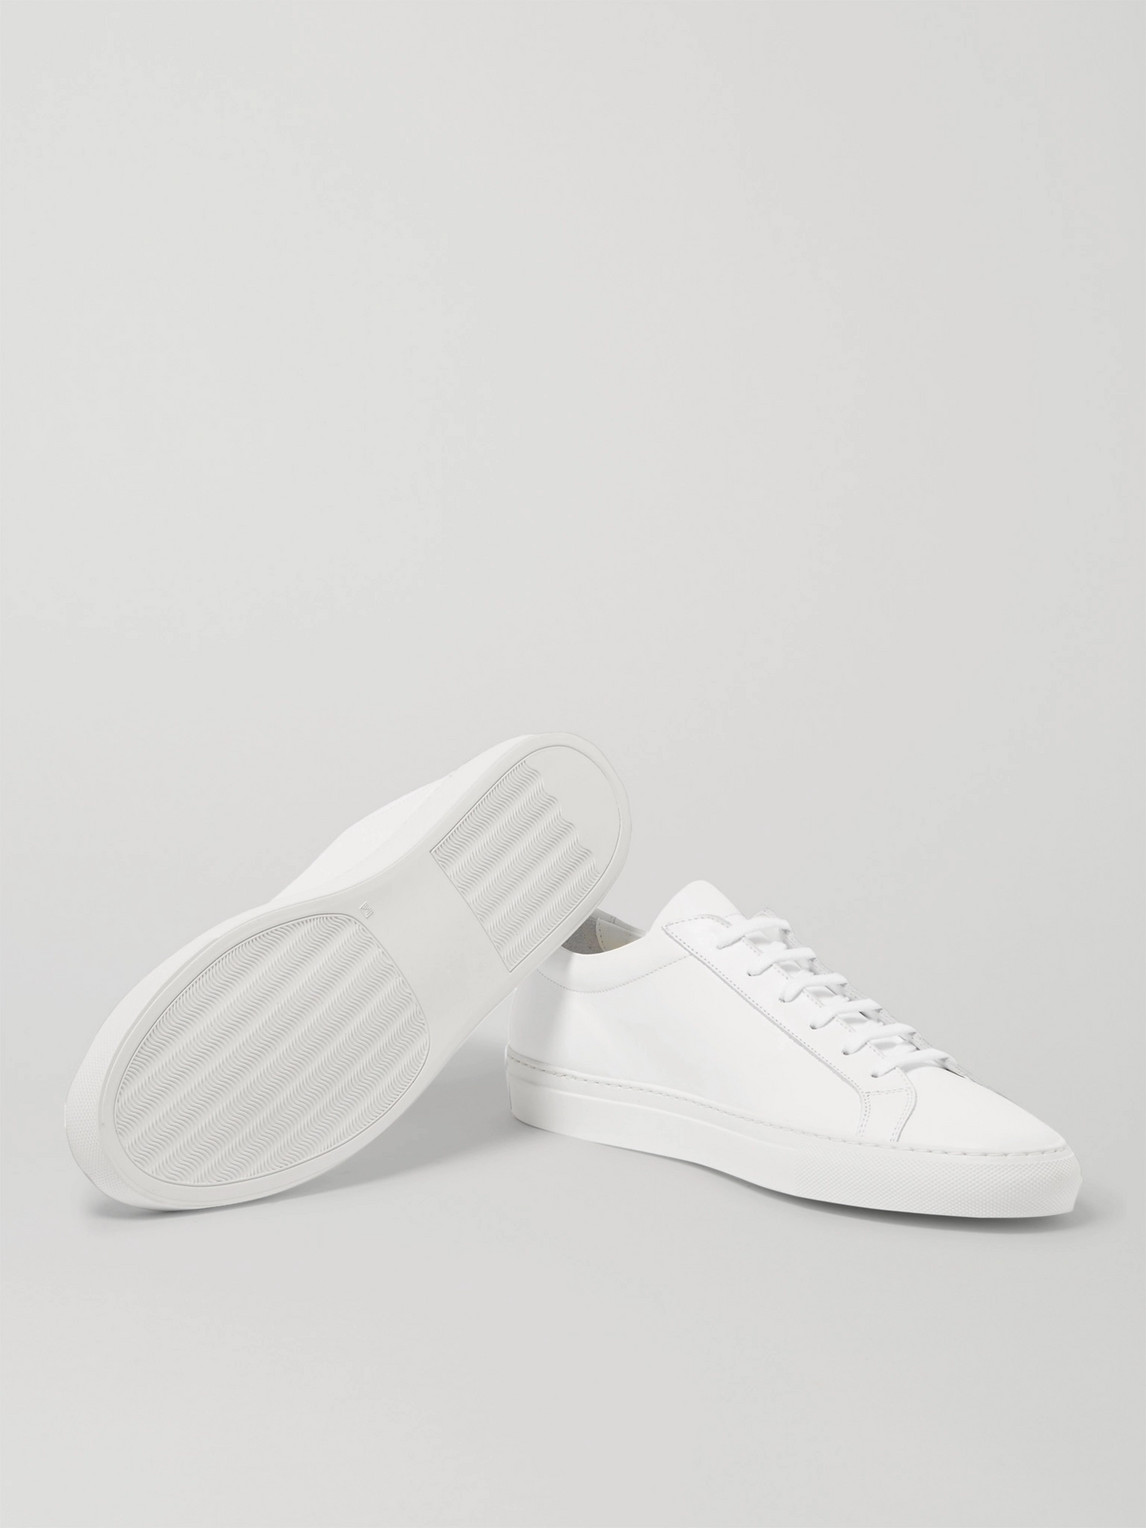 Shop Common Projects Original Achilles Leather Sneakers In White